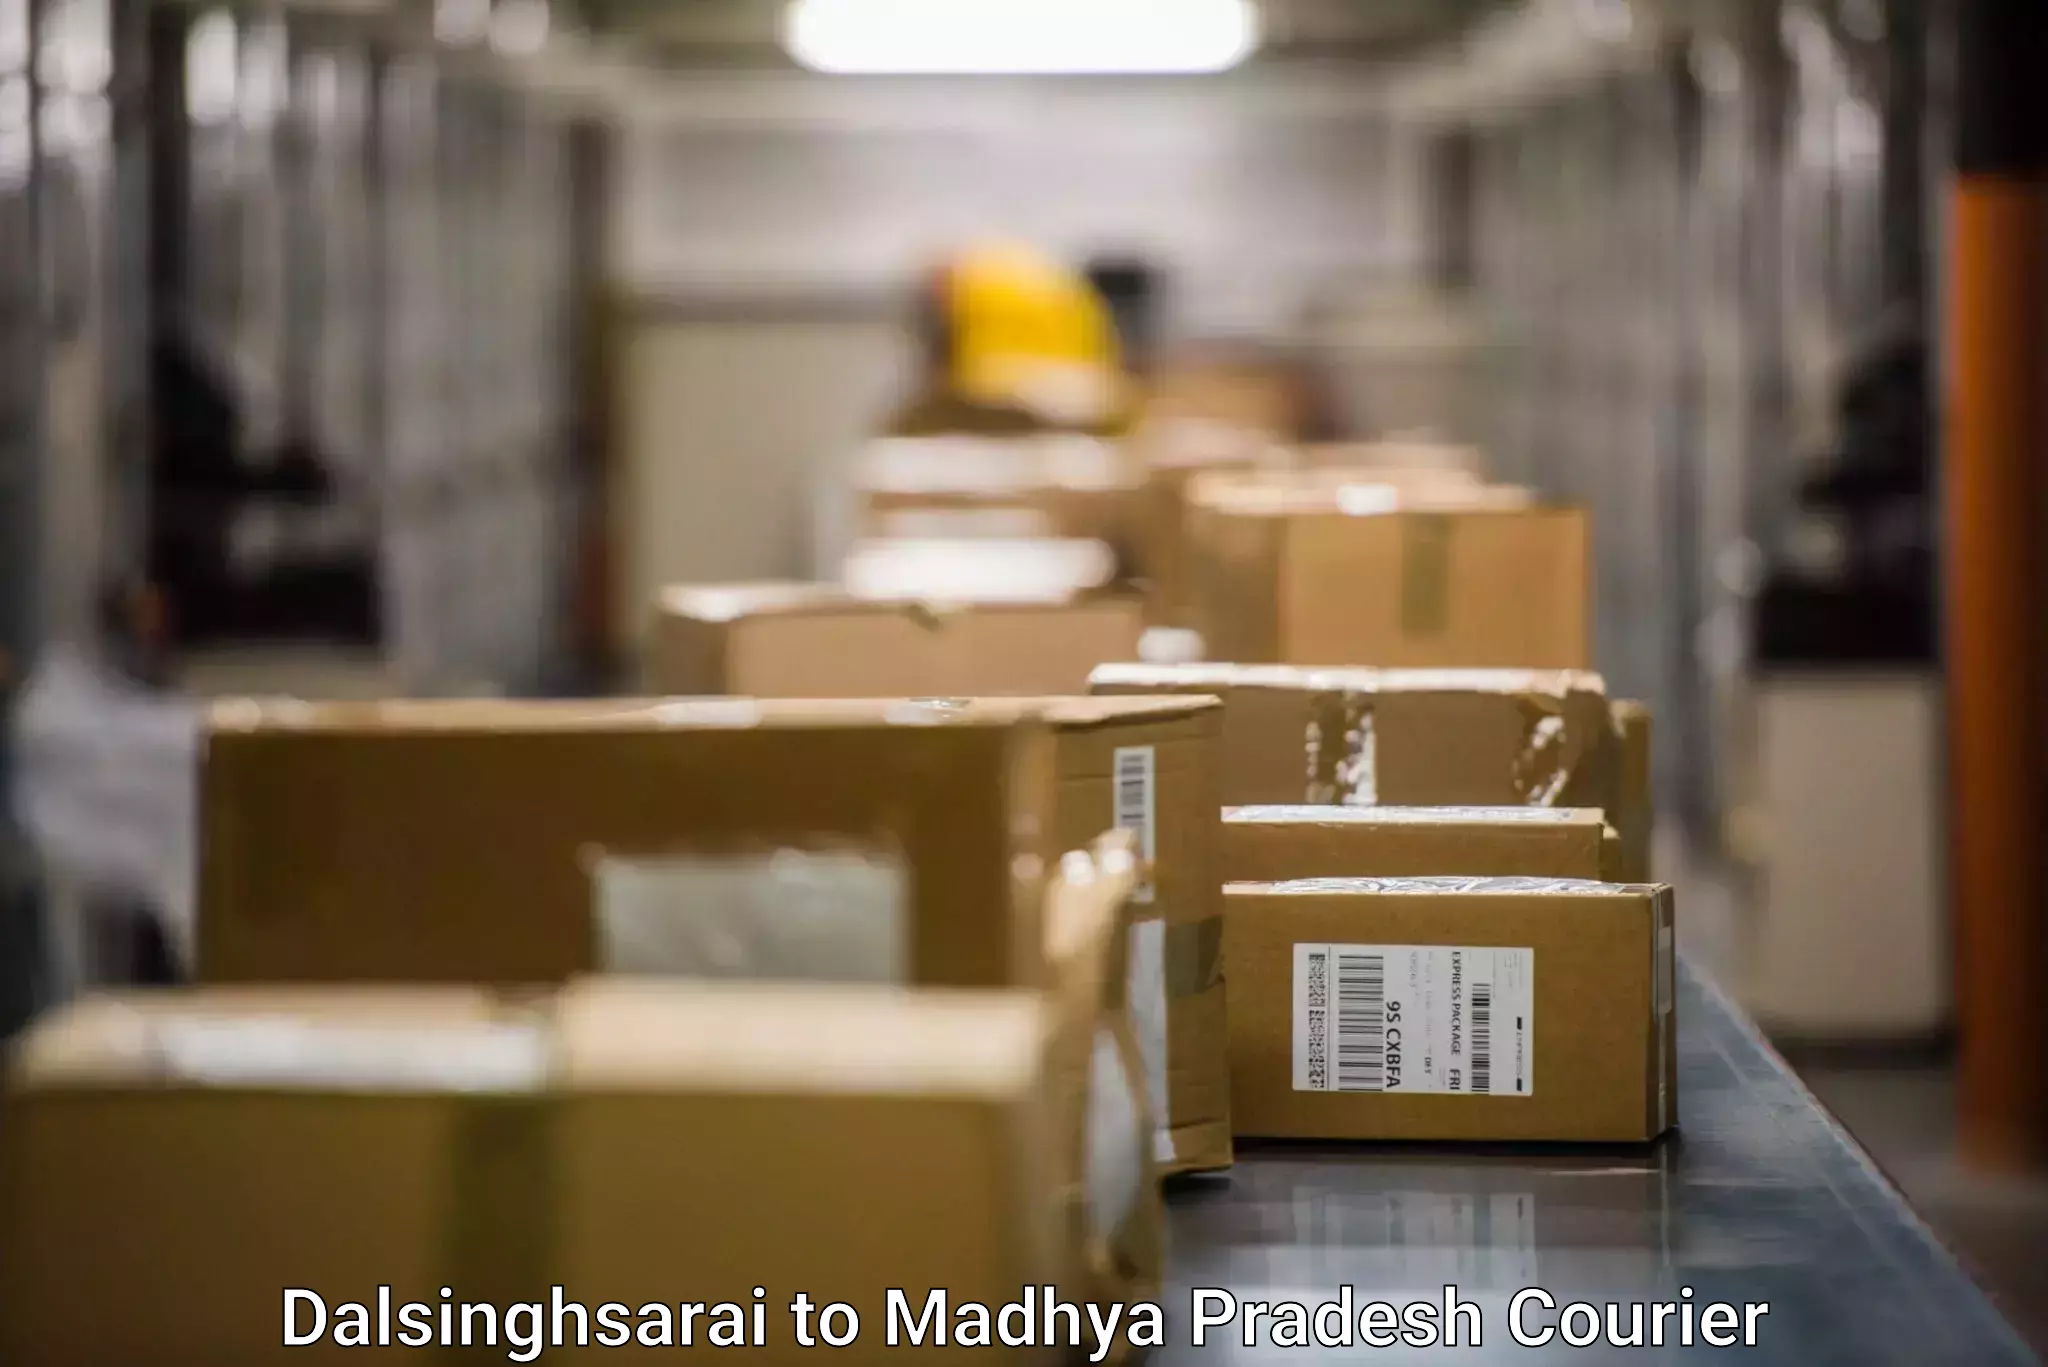 Courier service partnerships Dalsinghsarai to IIIT Bhopal